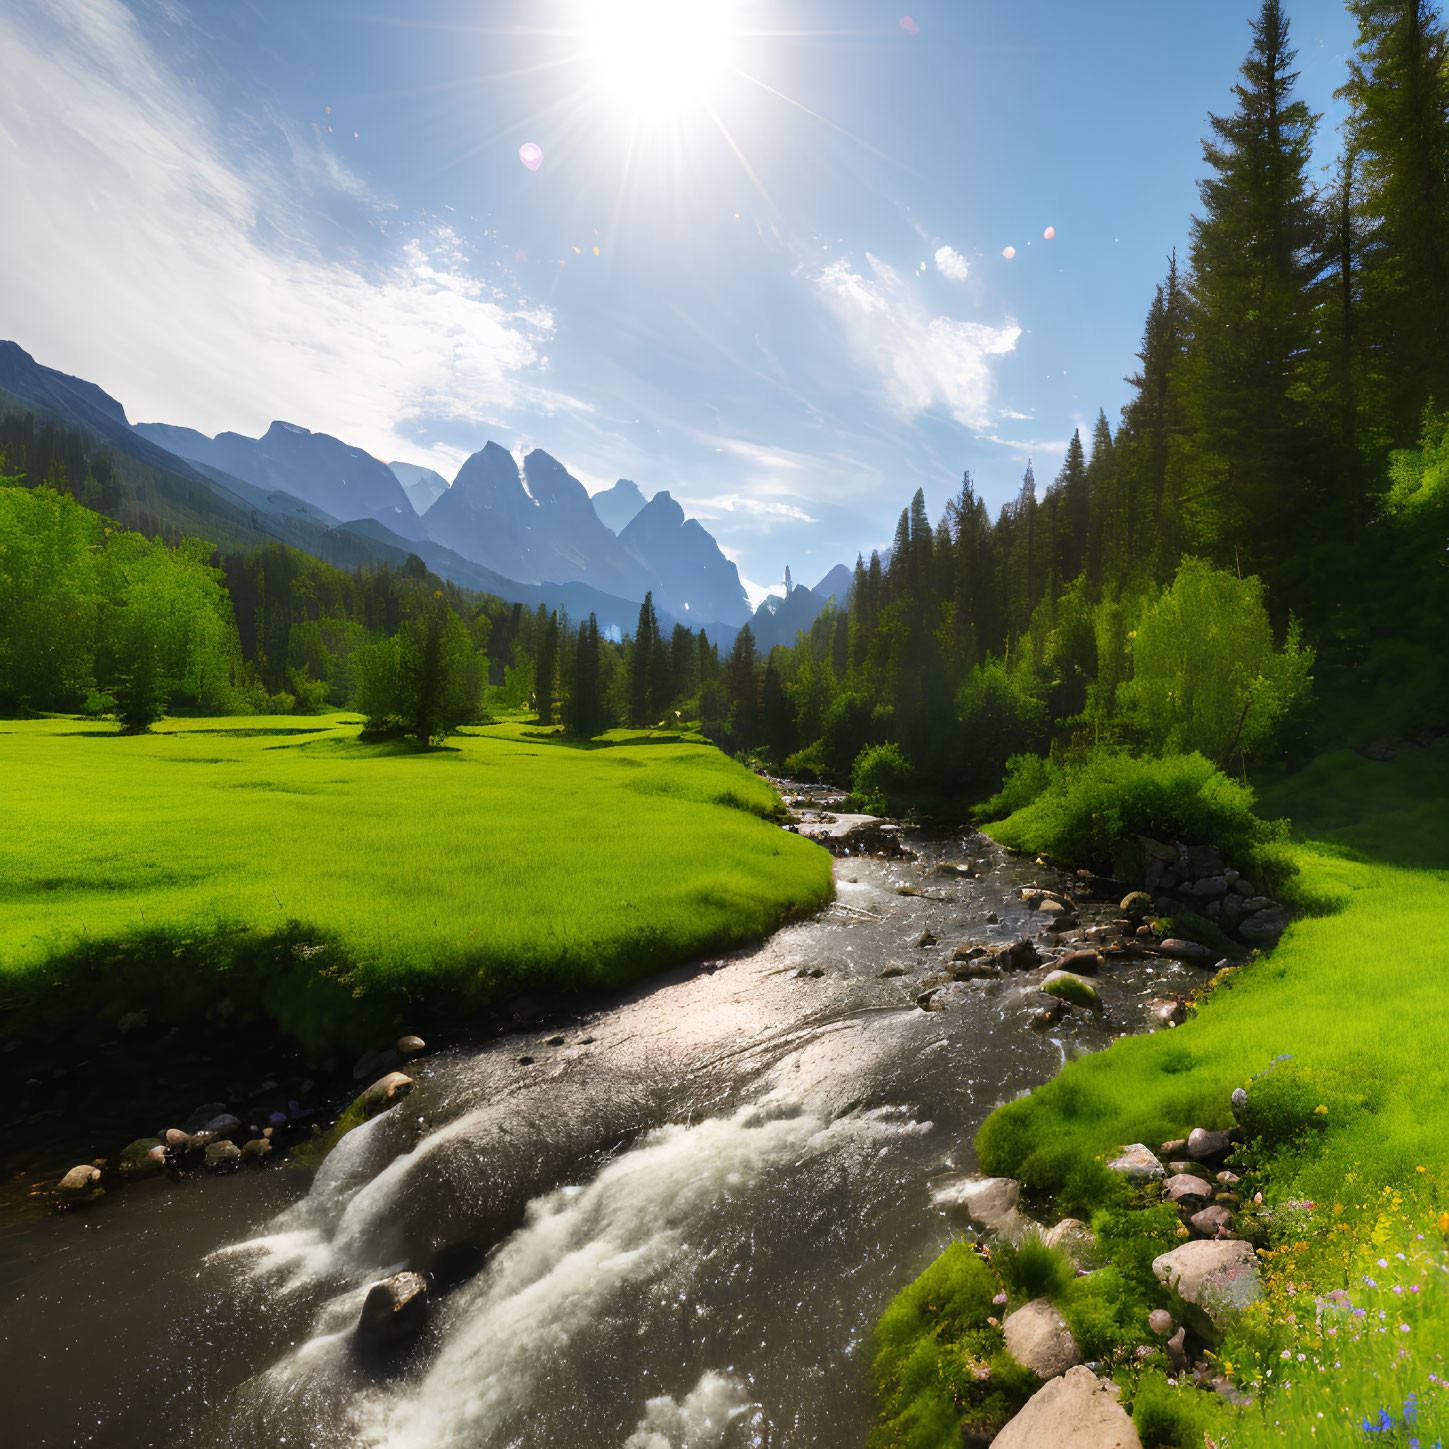 Scenic landscape: vibrant meadow, clear river, majestic mountains